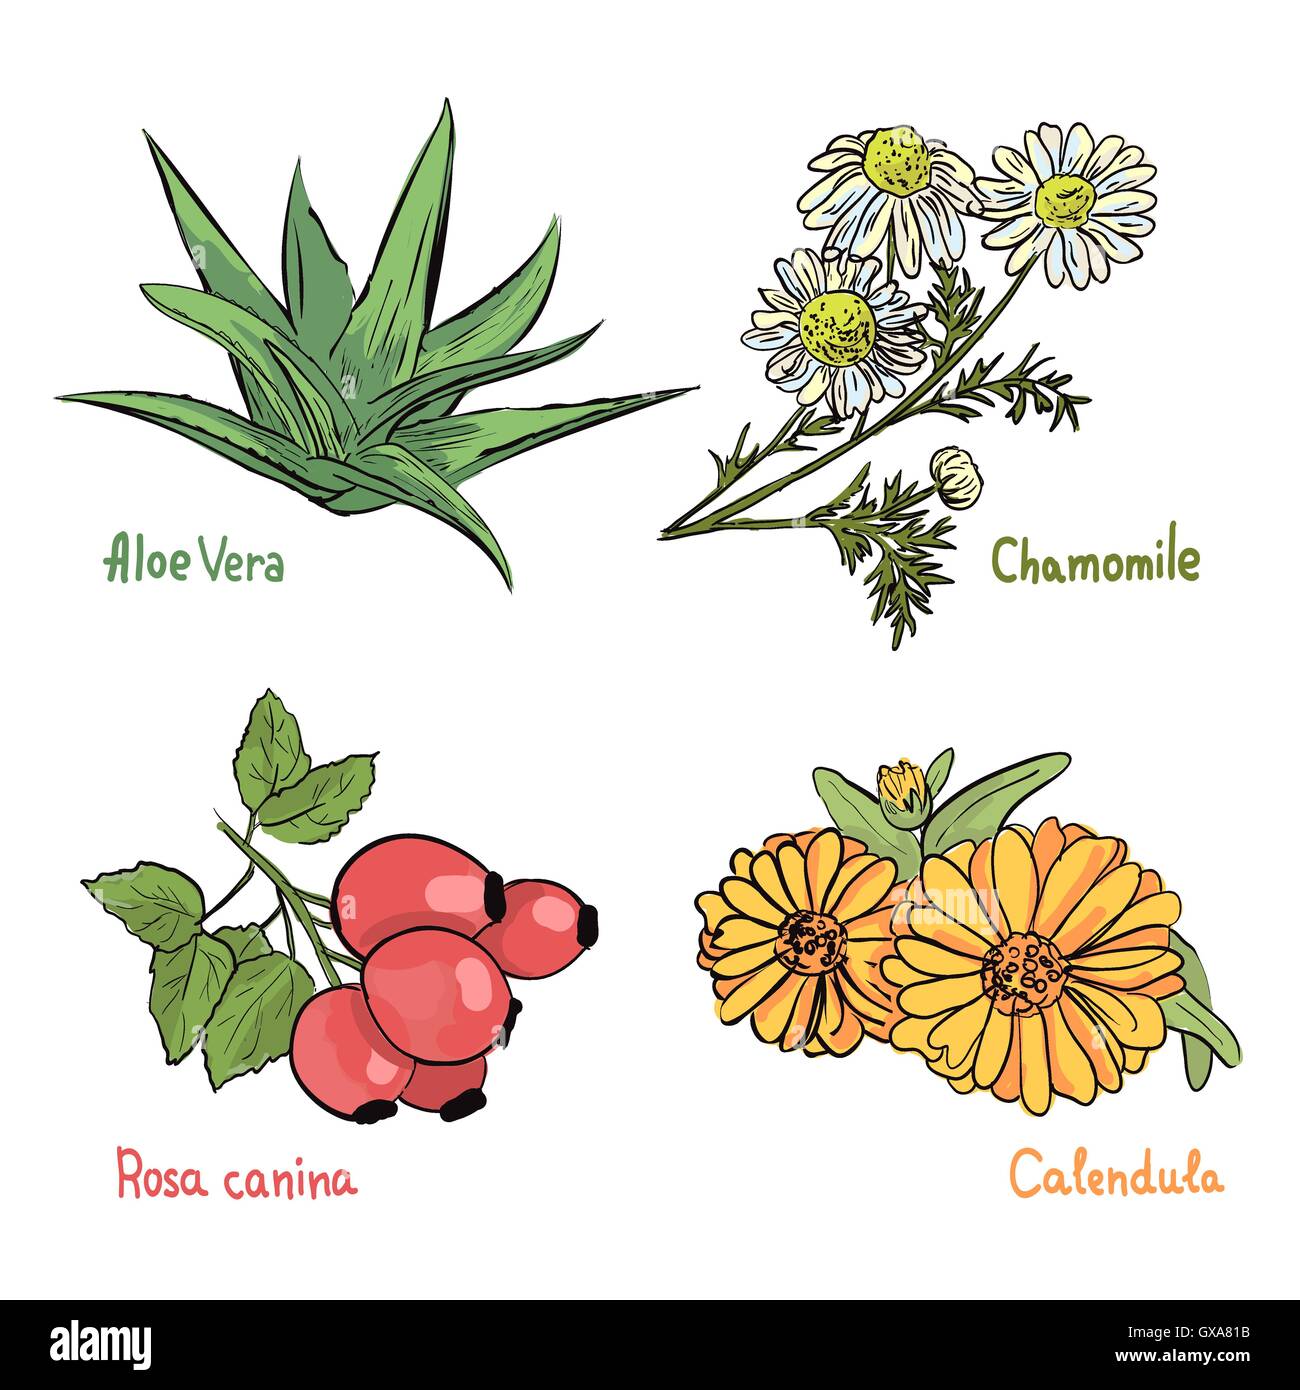 Hand drawn collection of medicinal plants and herbs on the white background. Aloe, Chamomile, Calendula and Brier plants. Cosmet Stock Vector